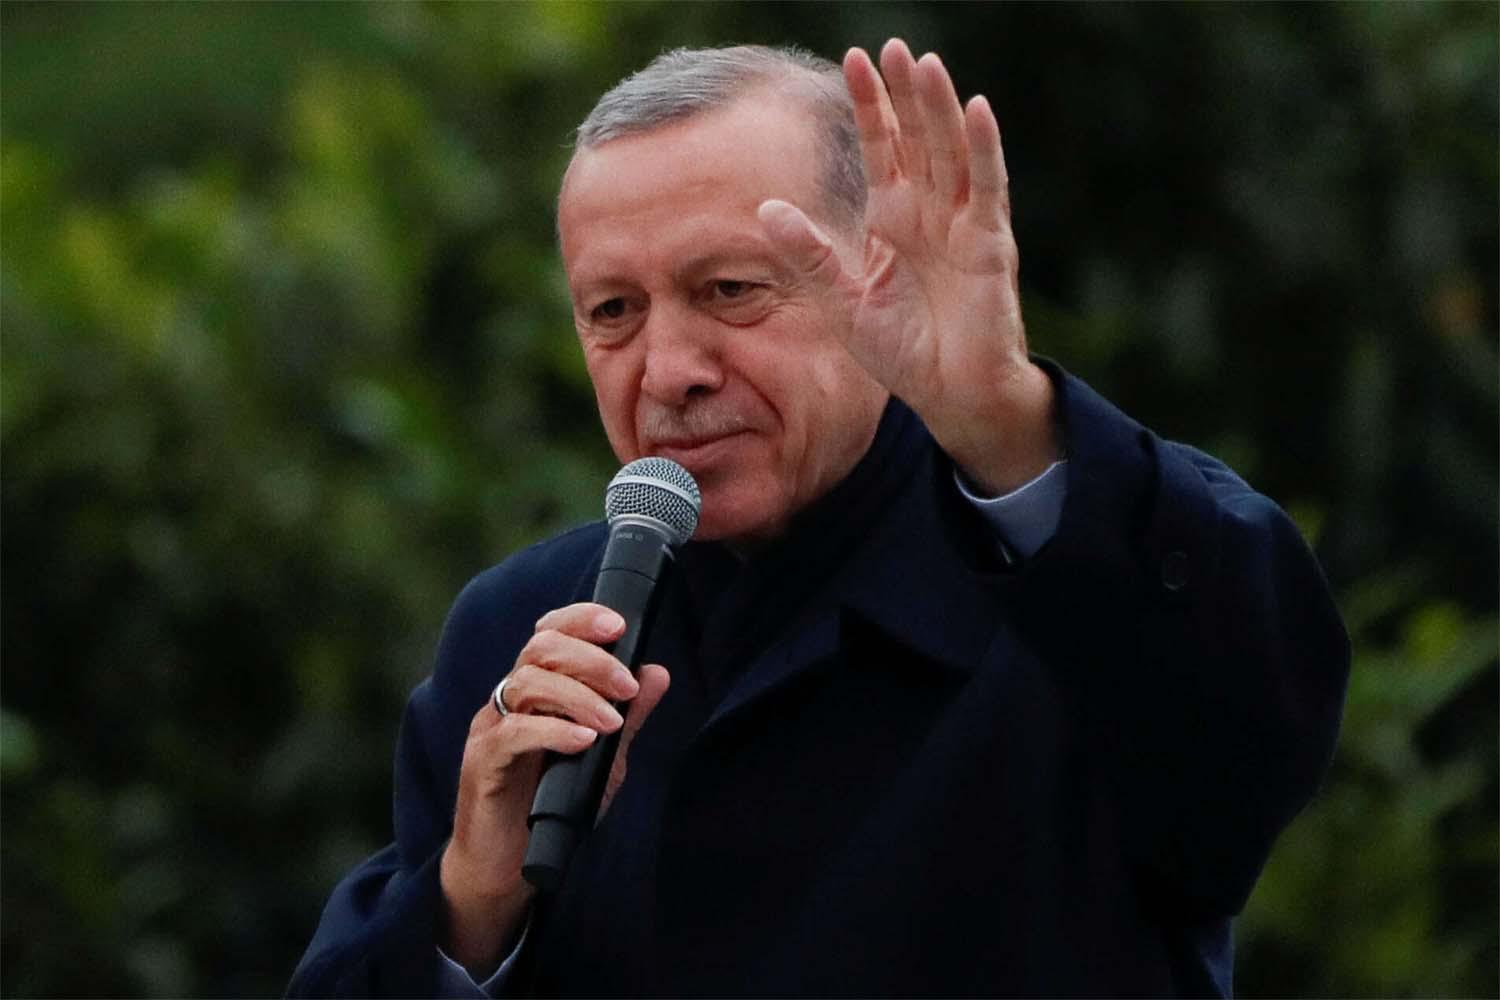 Erdogan's performance has wrong-footed opponents 